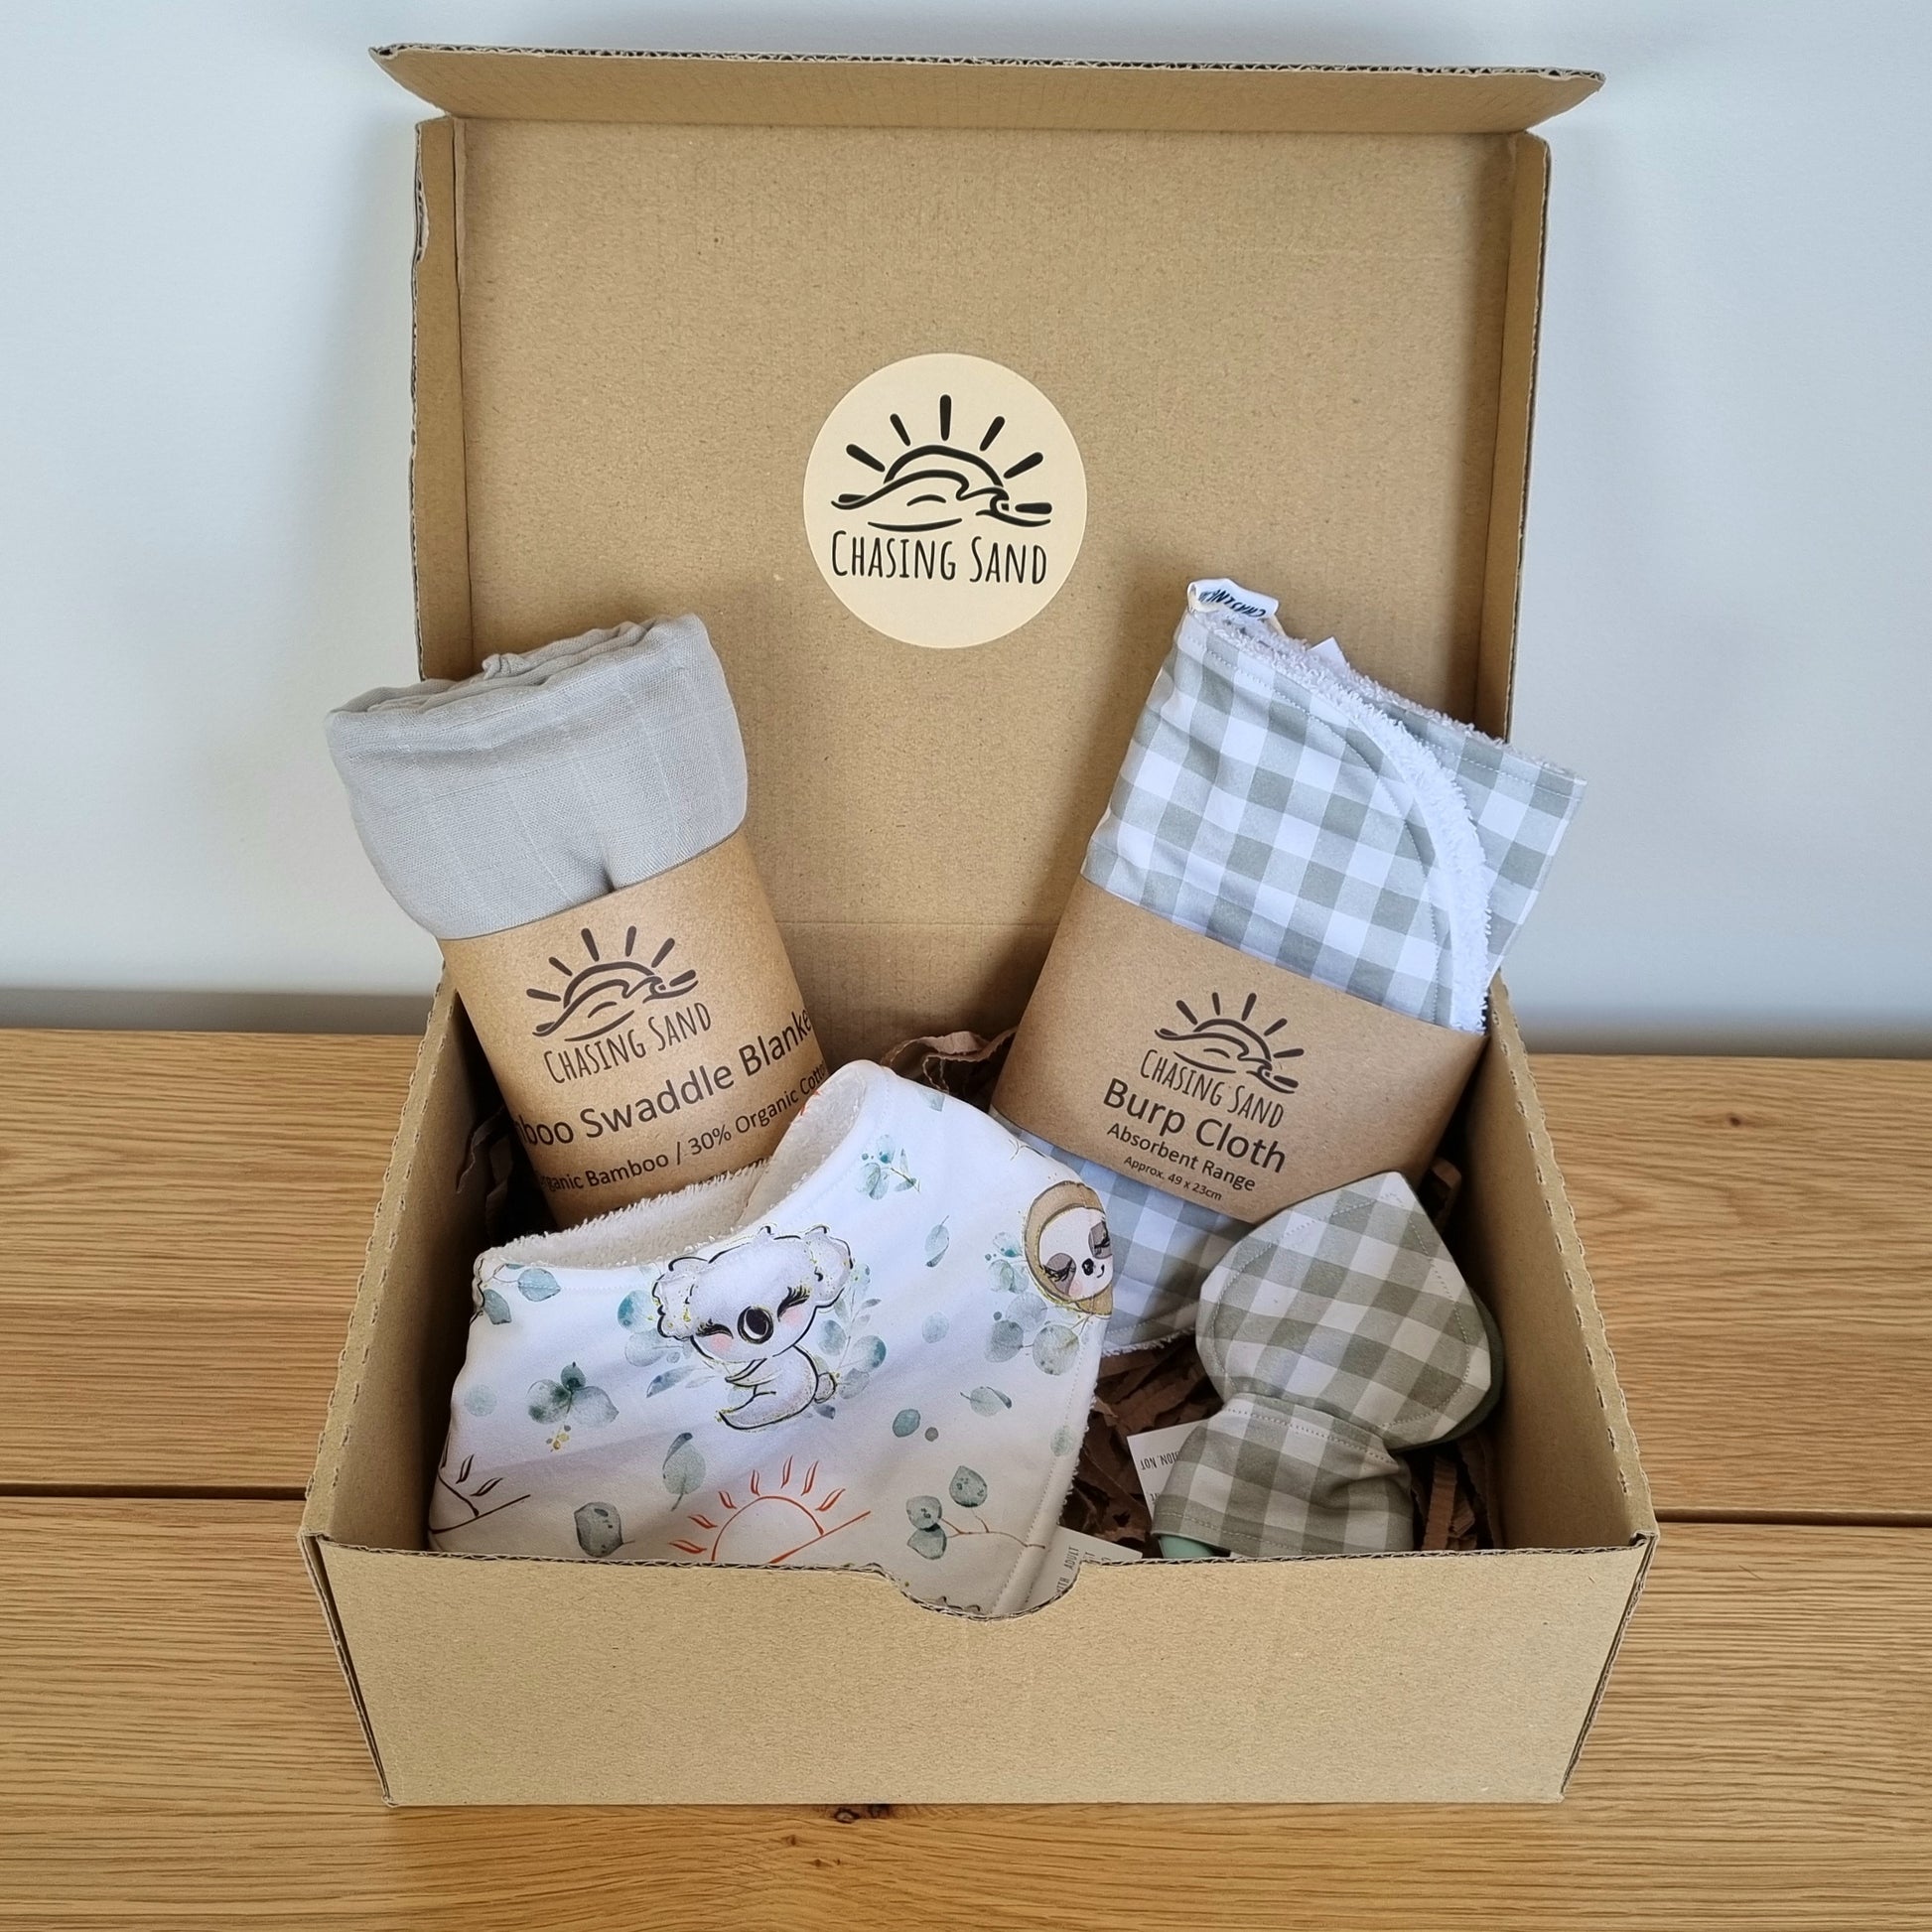 For Baby Gift Box - Neutral against wooden/white backdrop. Eco-friendly cardboard box containing 1x Swaddle Blanket, 1x Burp Cloth, 1x Dribble Bib and 1x Teether.